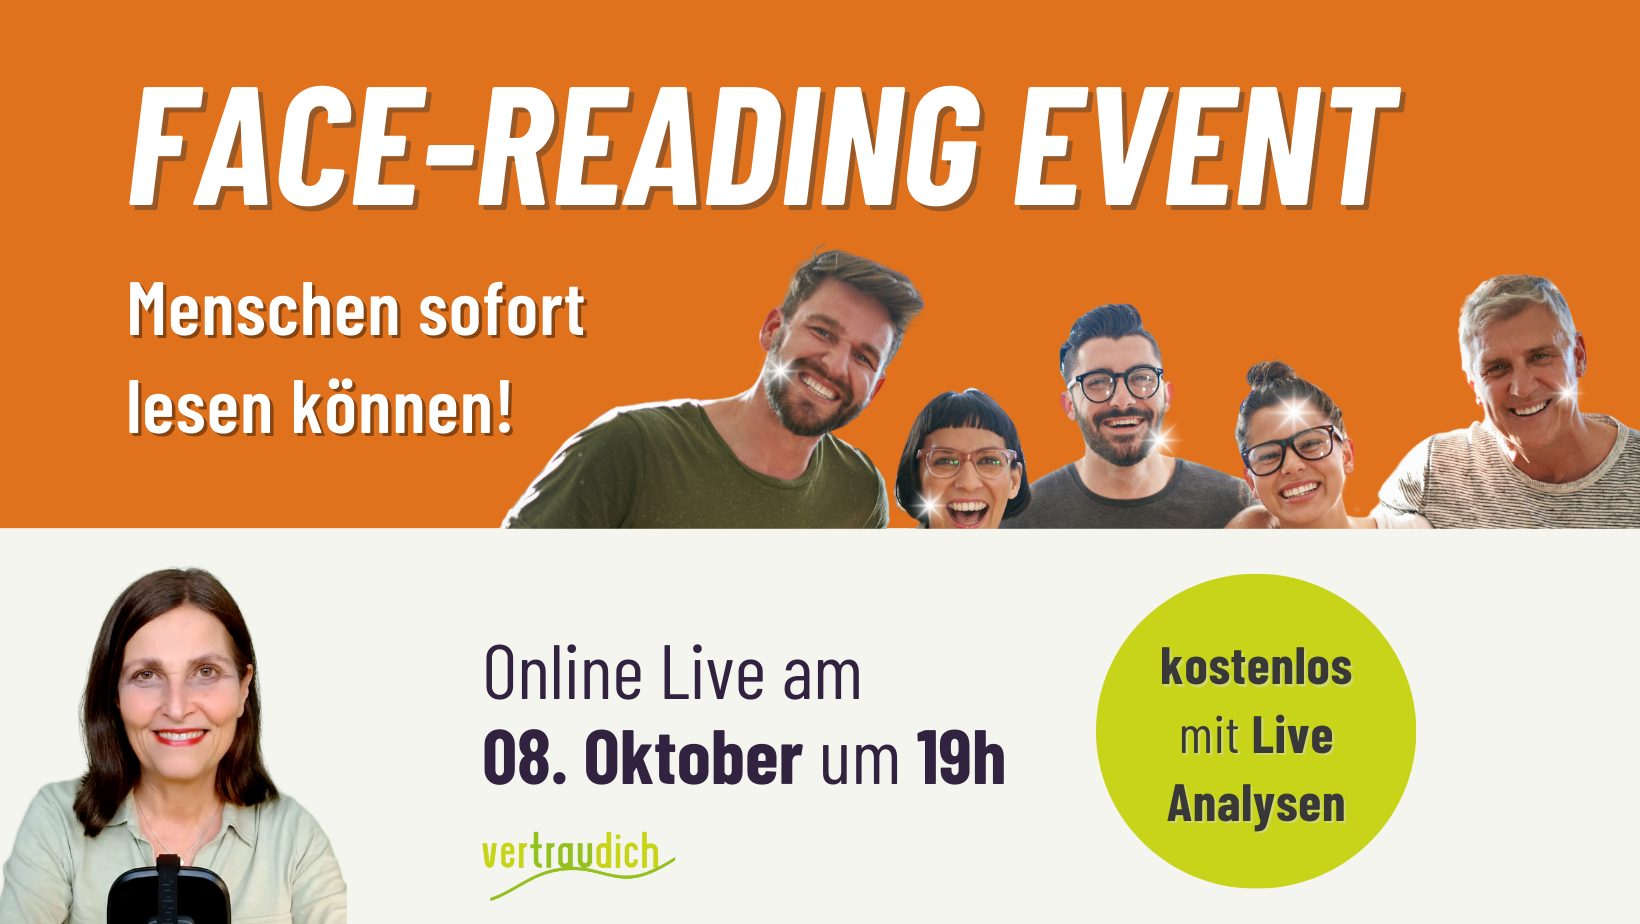 vertraudich face reading event